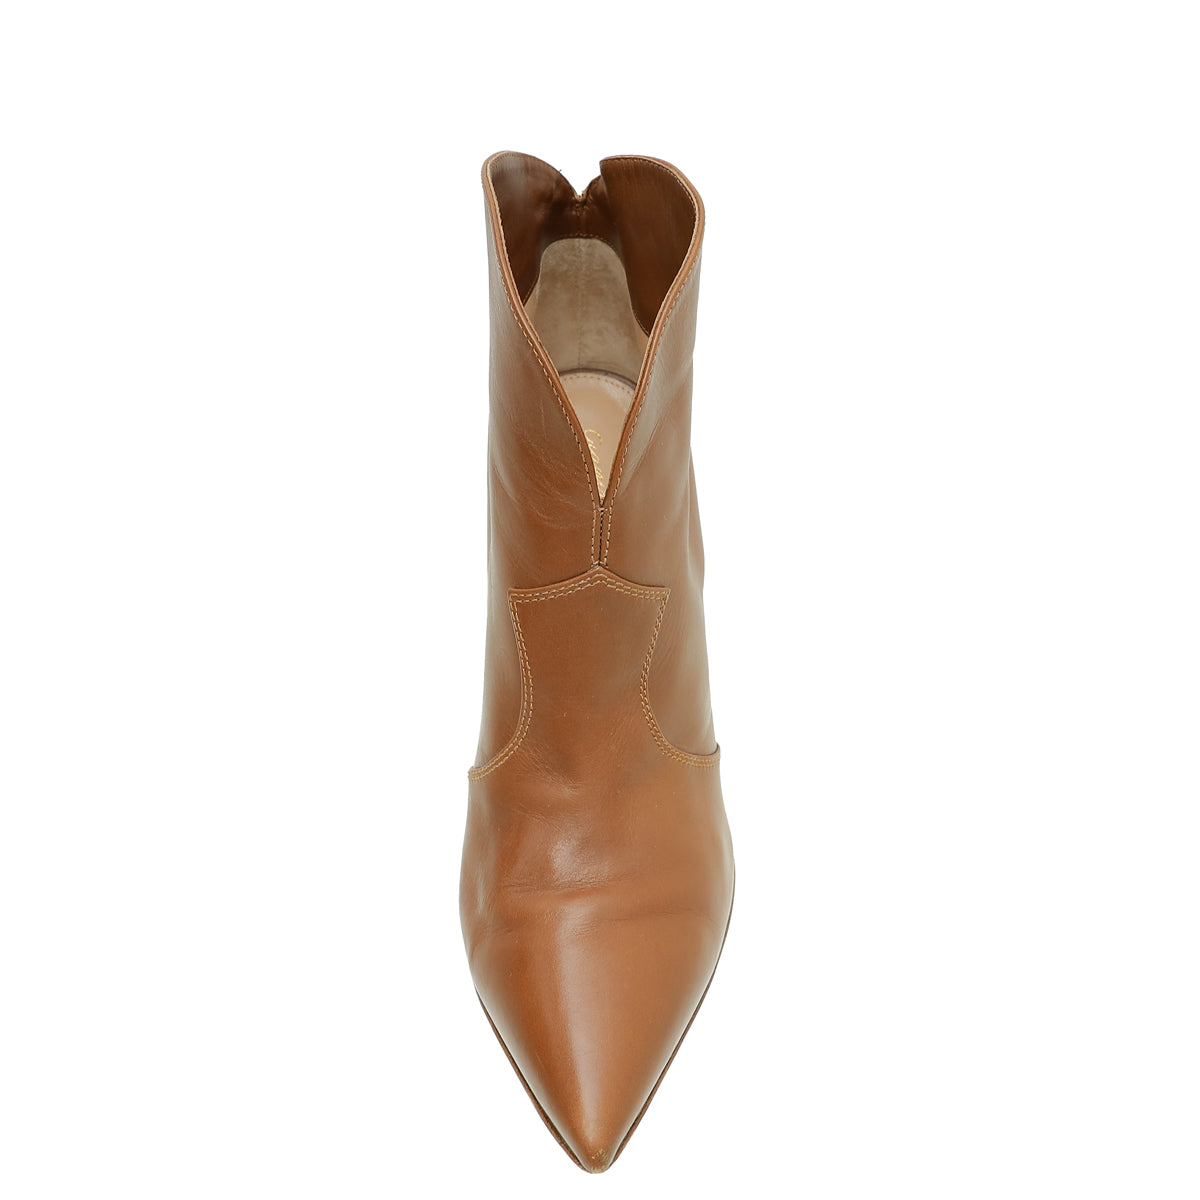 Gianvito Rossi Brown Pointed Ankle High Boot 40